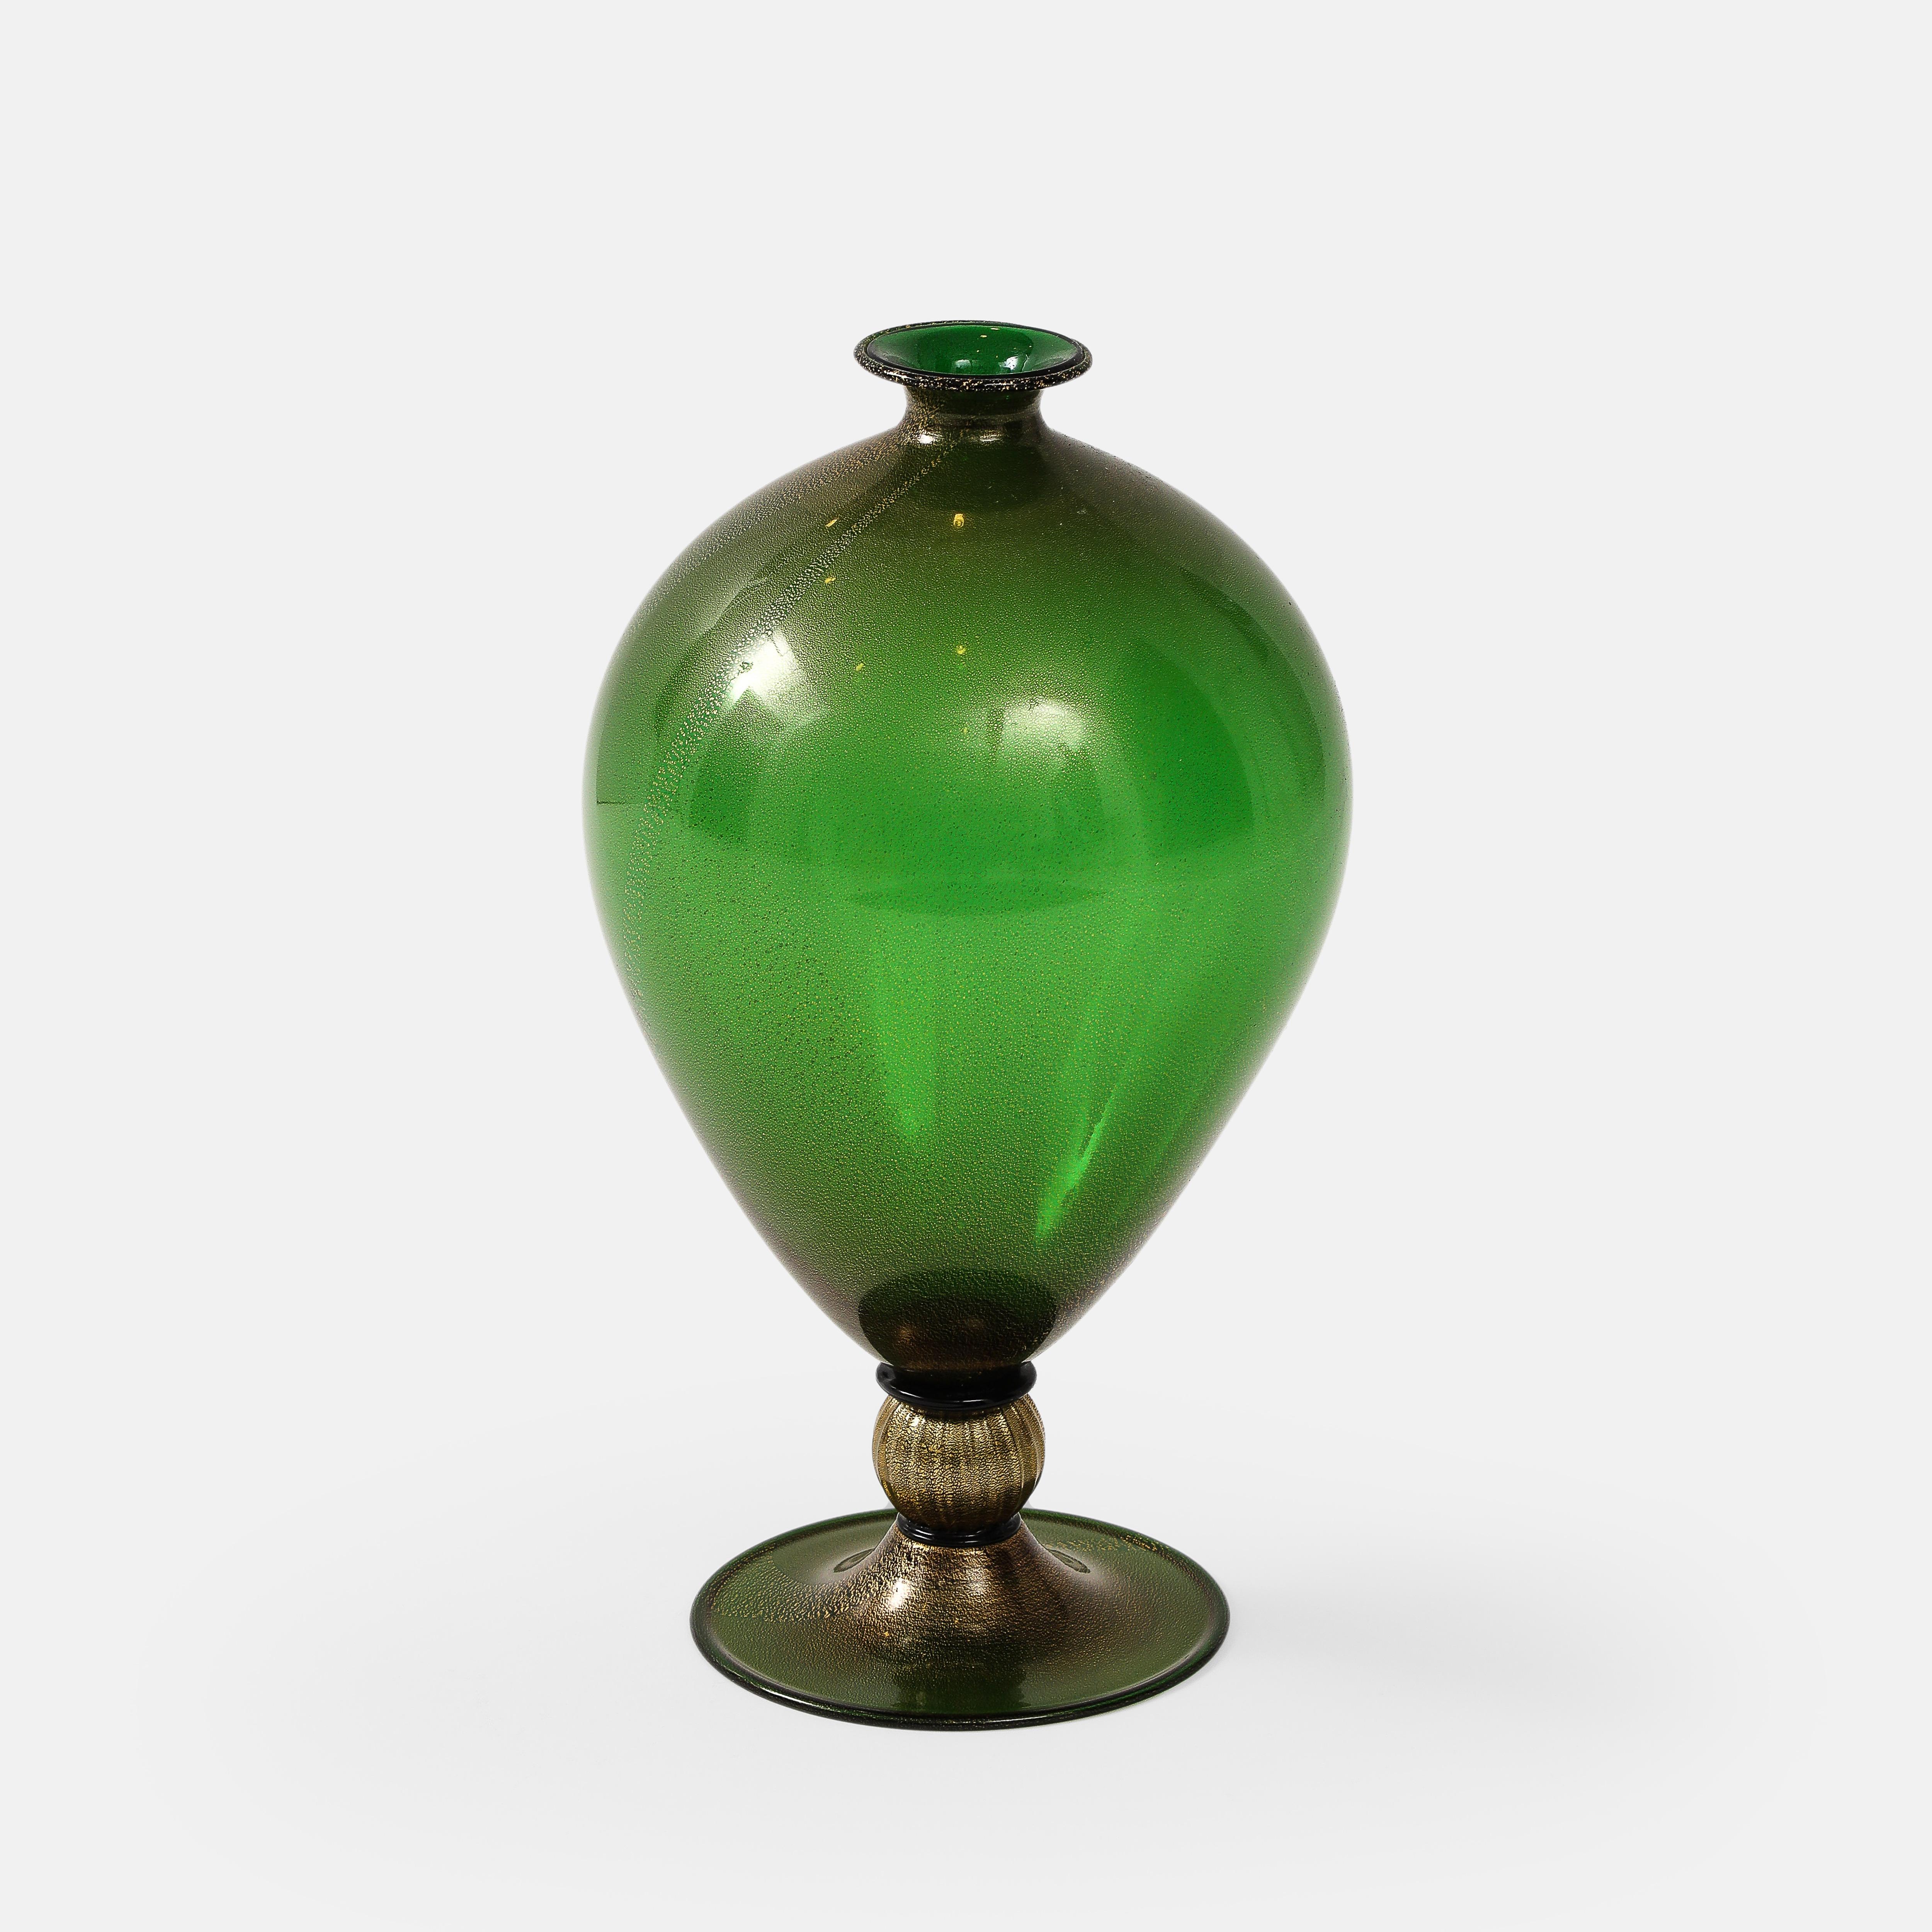 Segoso vetri d'arte rare and exquisite 'Veronese' blown glass vase in cased green-colored glass with gold foil applications, Murano, 1939.  This extraordinary vase is classic in form - the widely applied denomination of this vase 